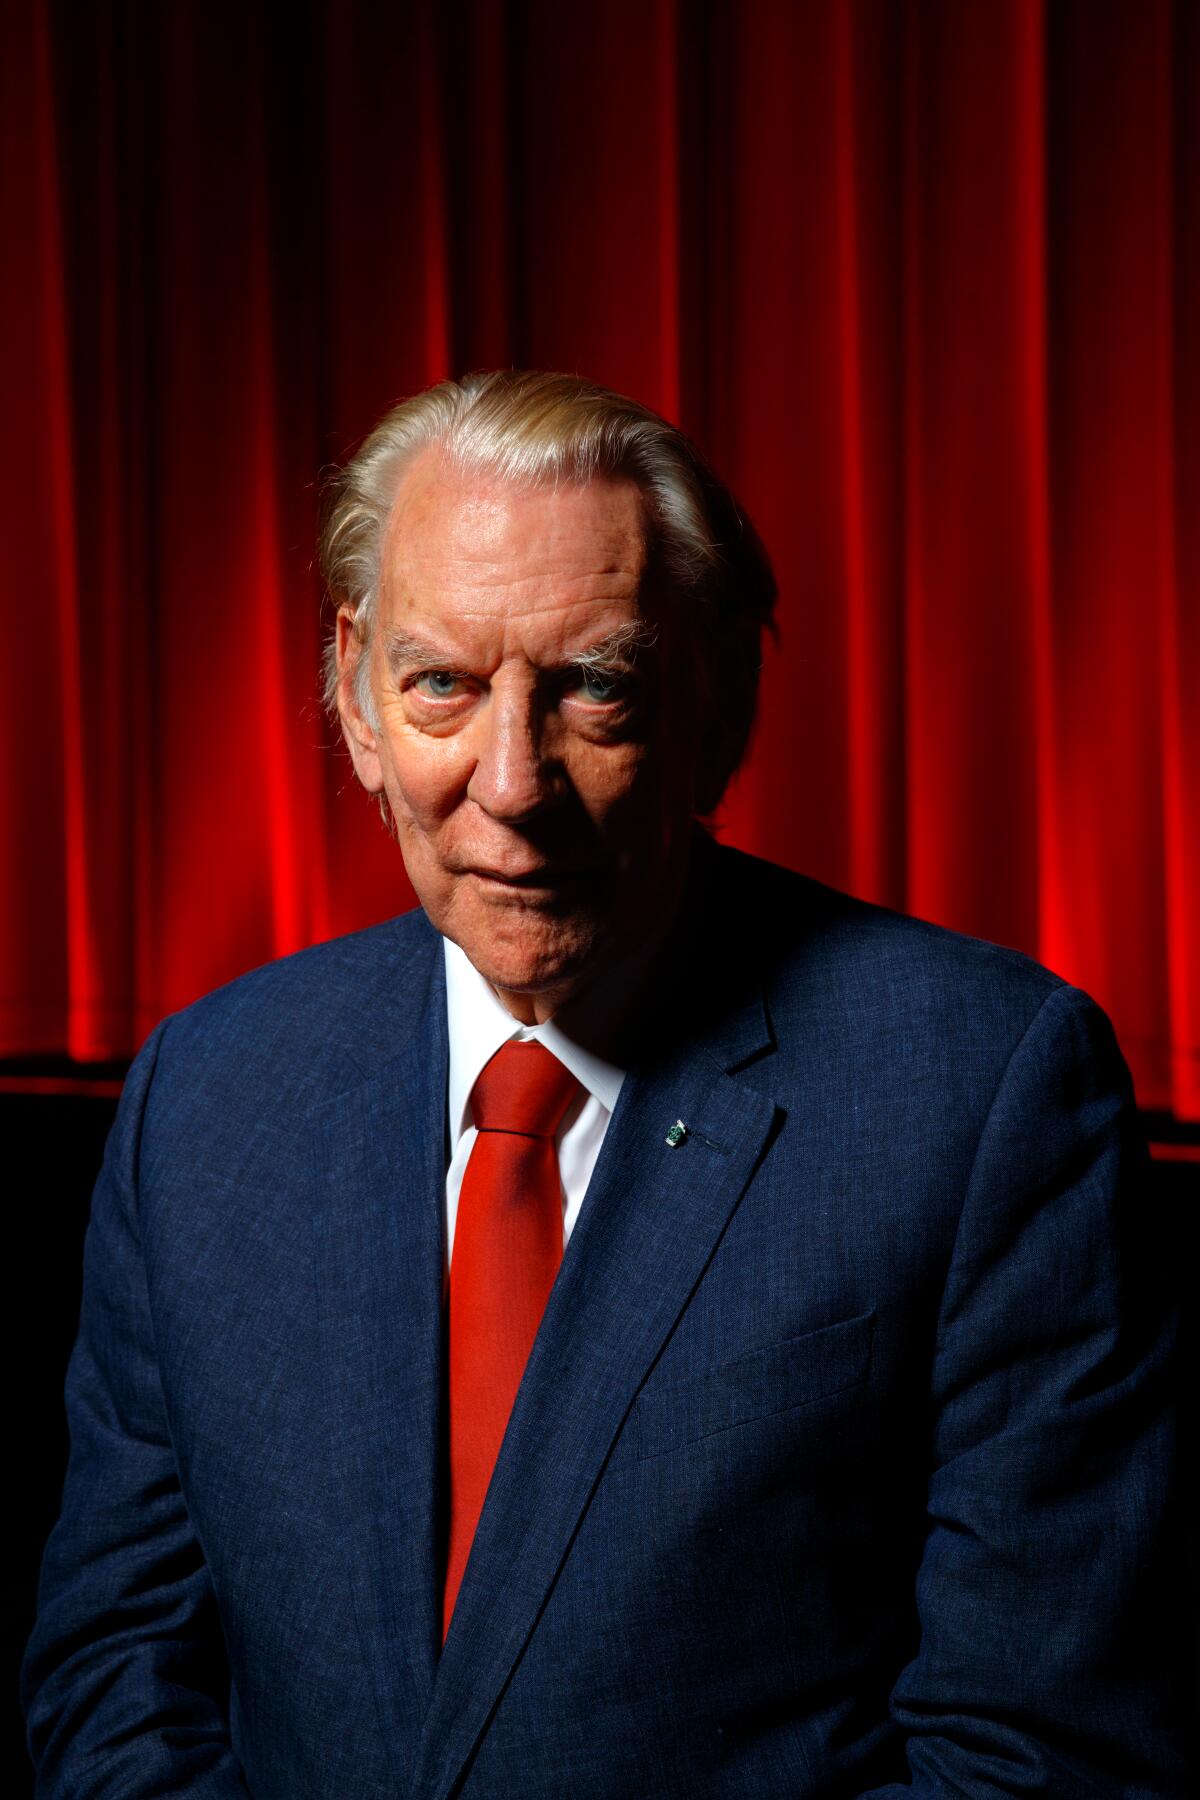 Donald Sutherland, in a blue suit and red tie, stands in front of a red stage curtain.